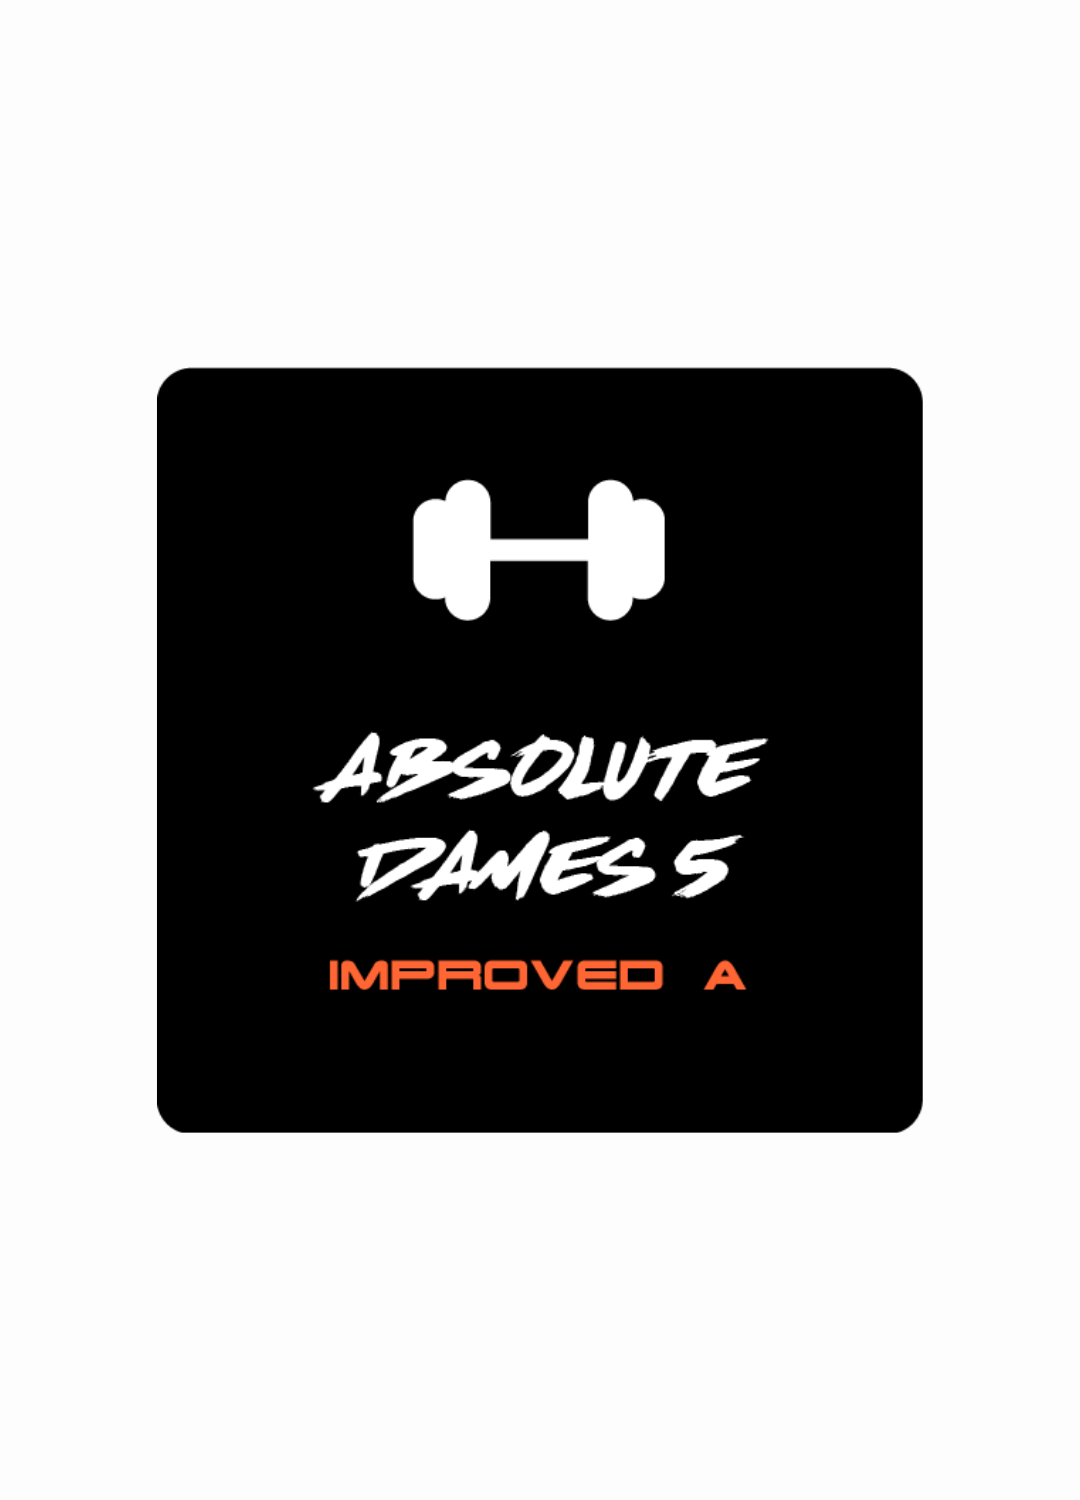 Dames 5 - Improved A (Training - Ebook)